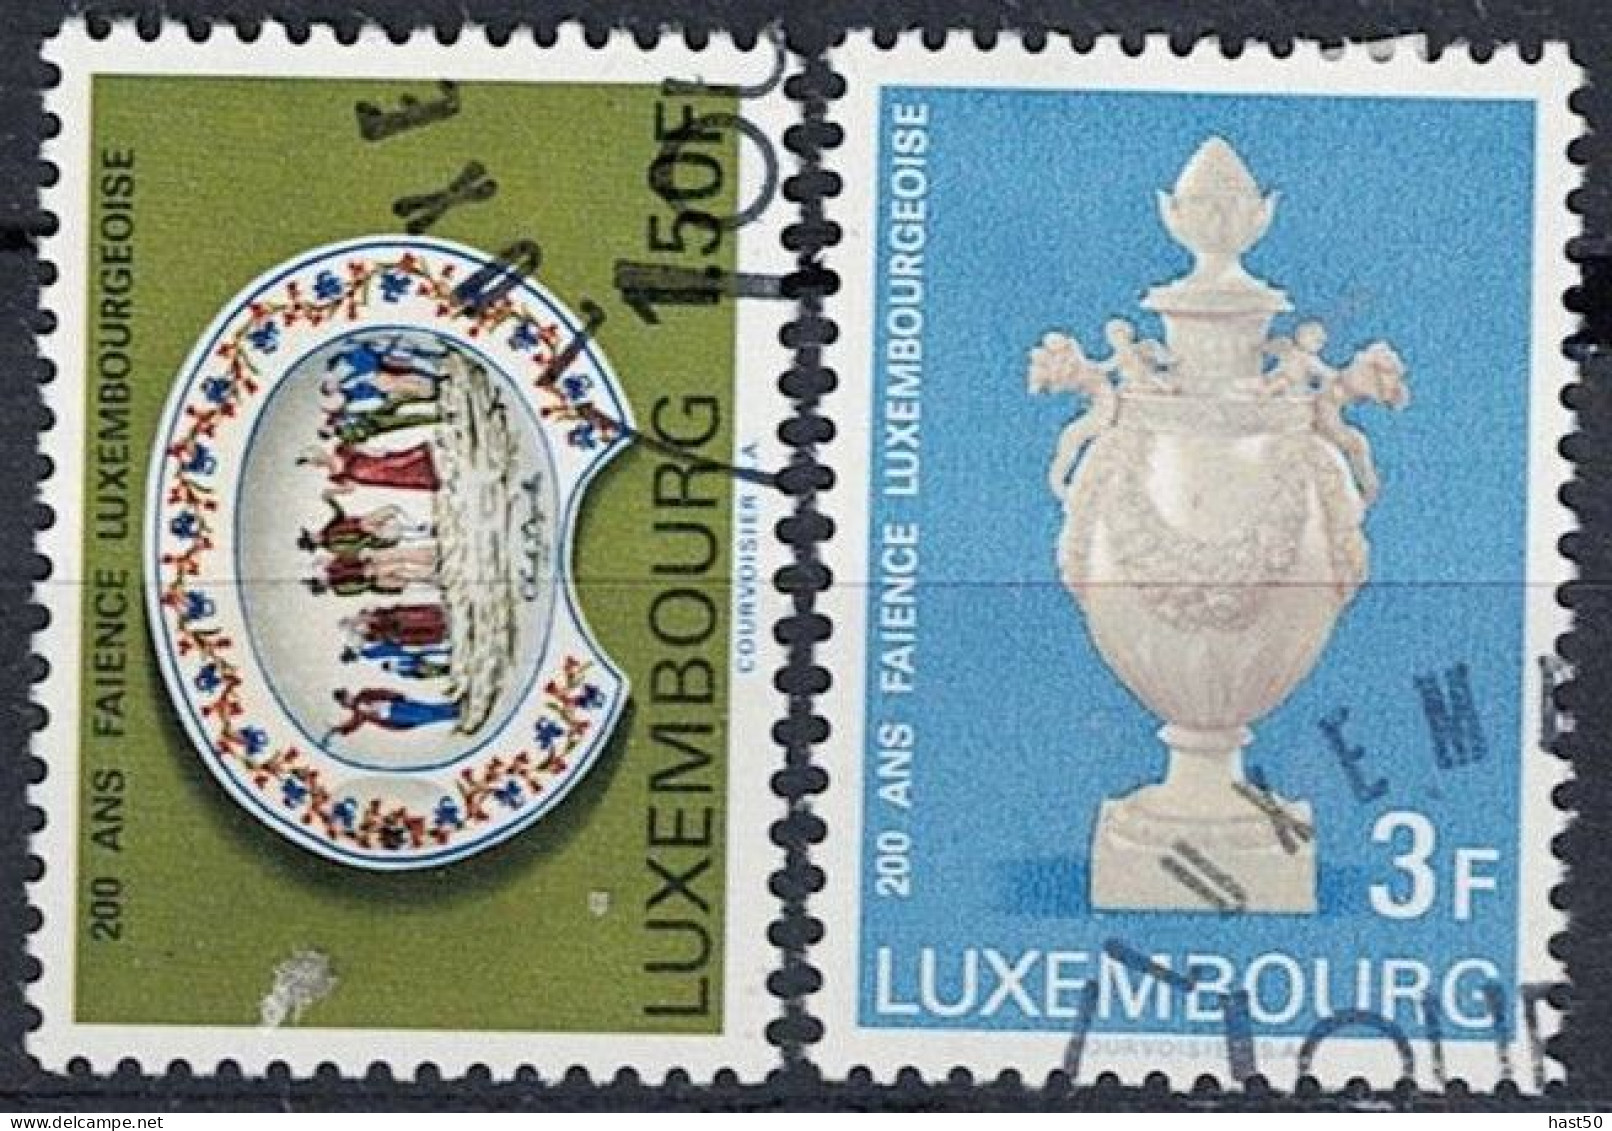 Luxemburg - 200 Jahre Fayence (MiNr: 754/5) 1967 - Gest Used Obl - Used Stamps